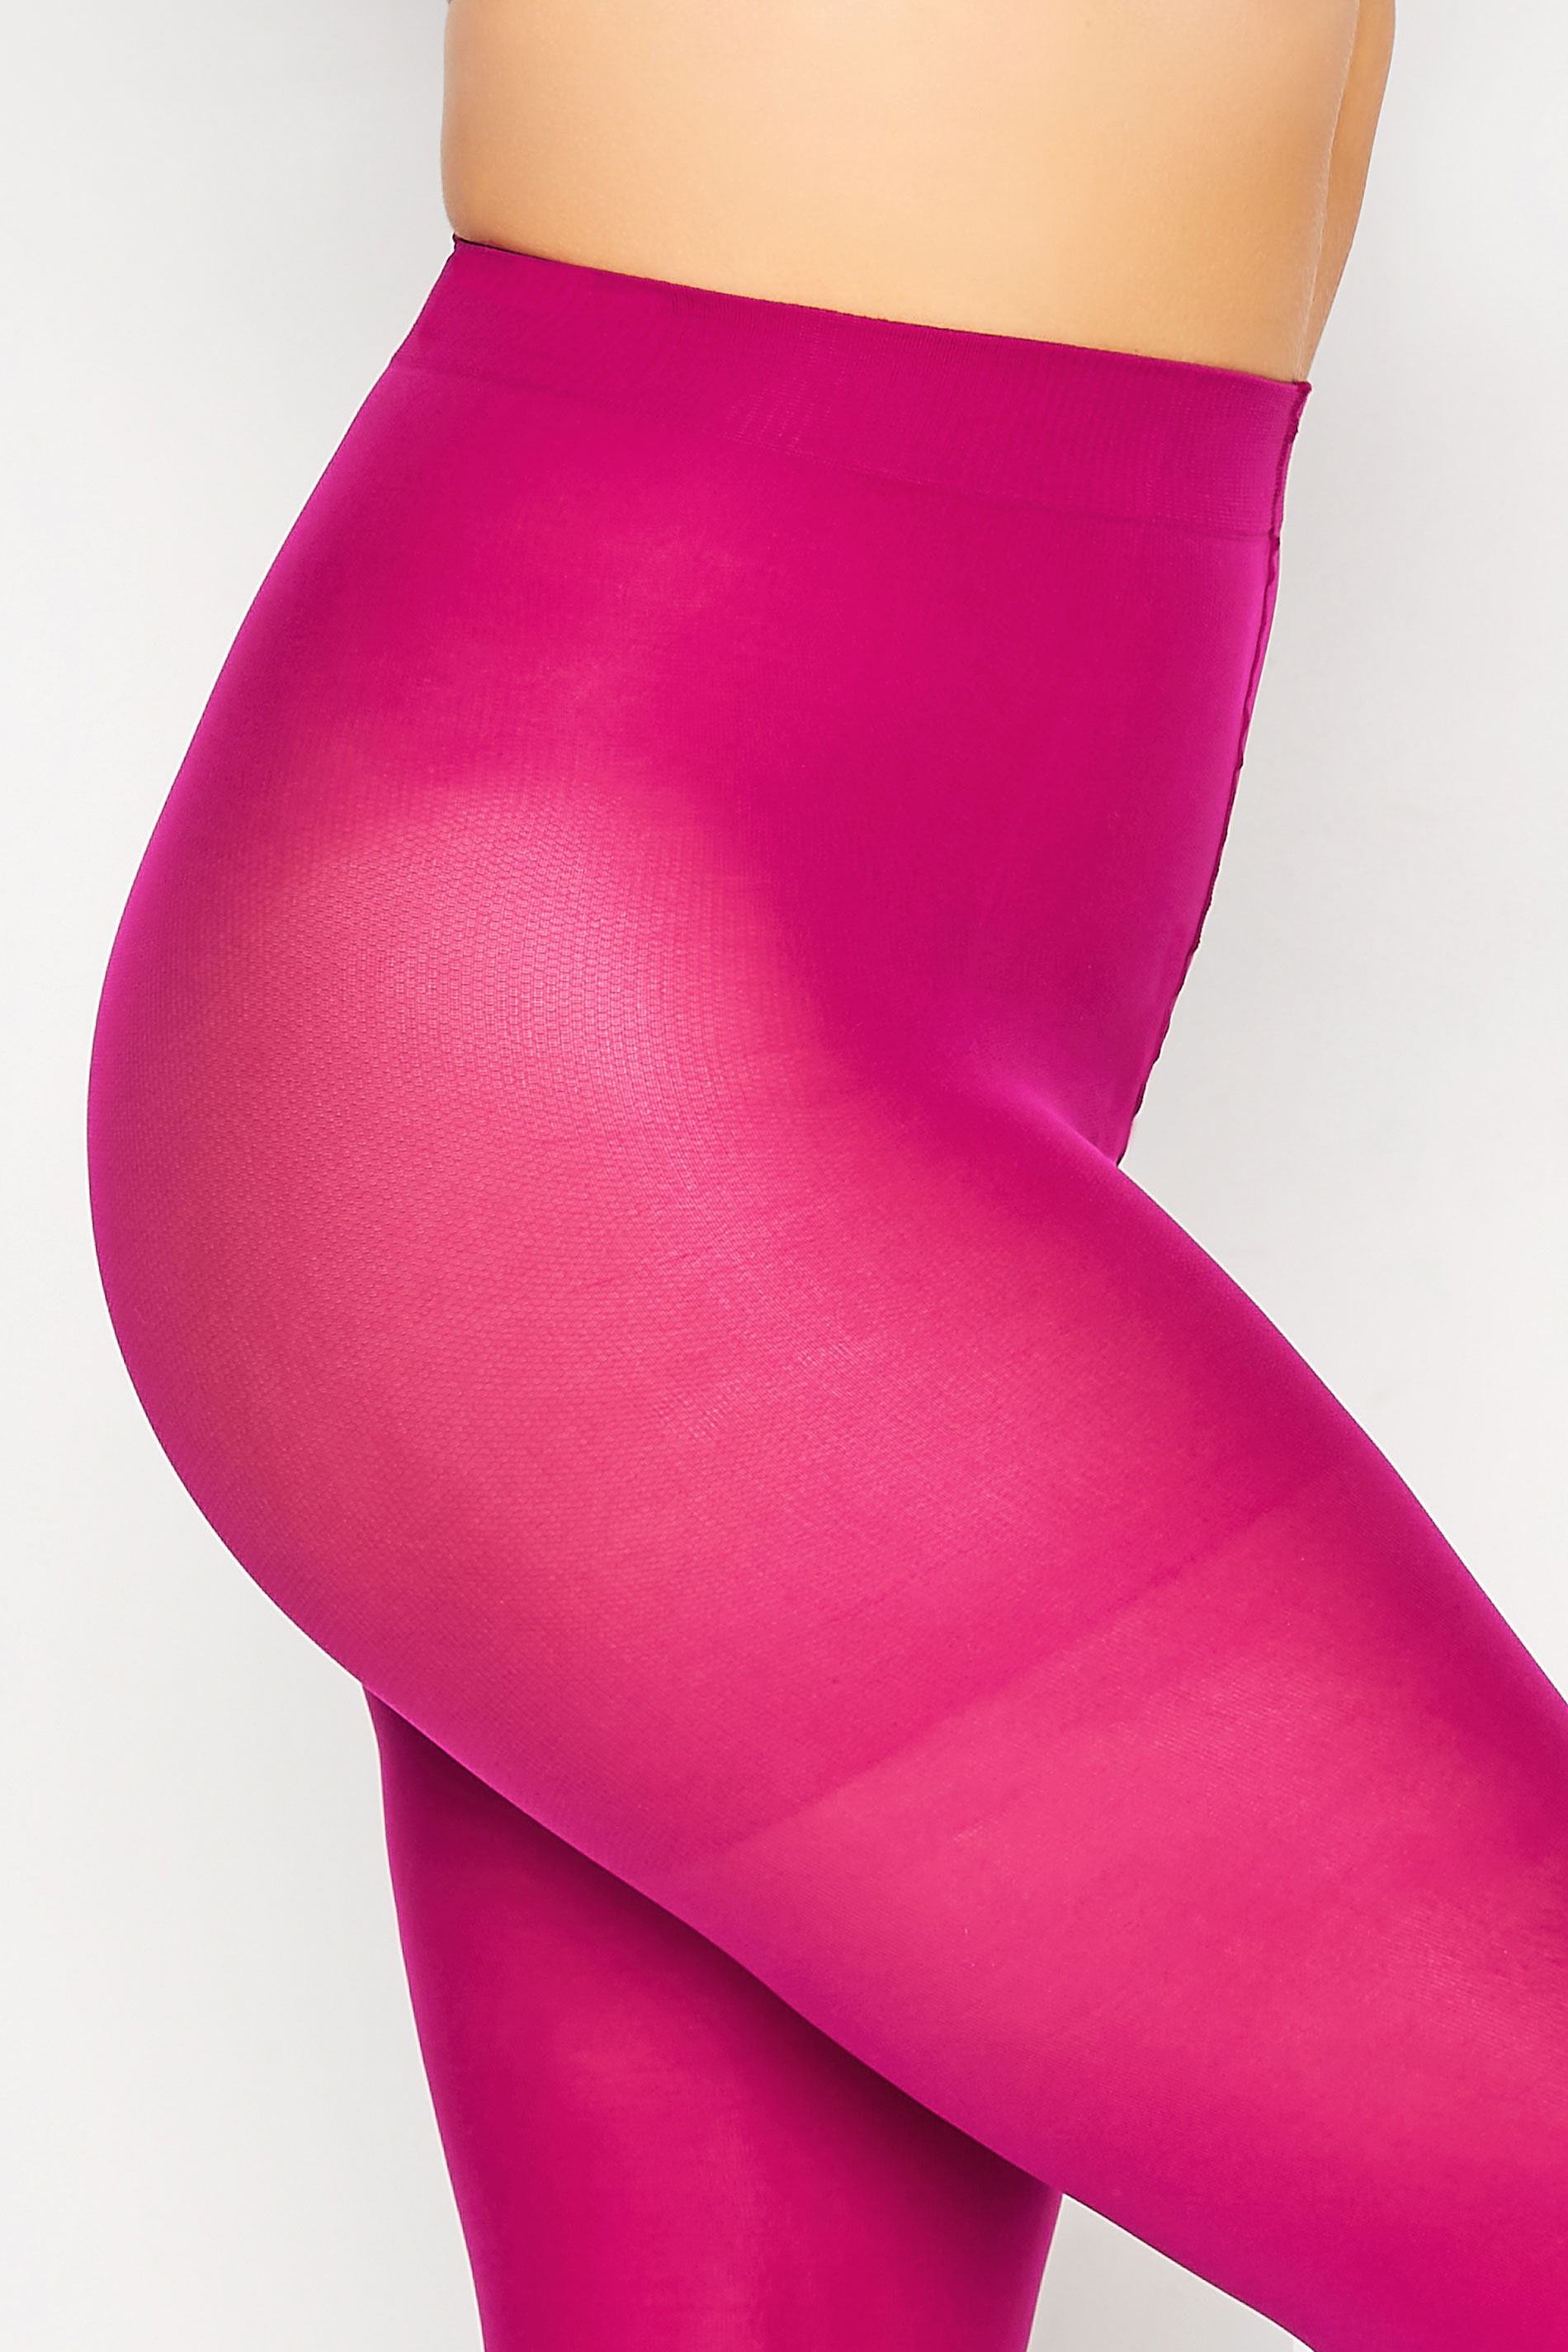 Spandex Pink Stockings & Thigh-Highs for Women for sale